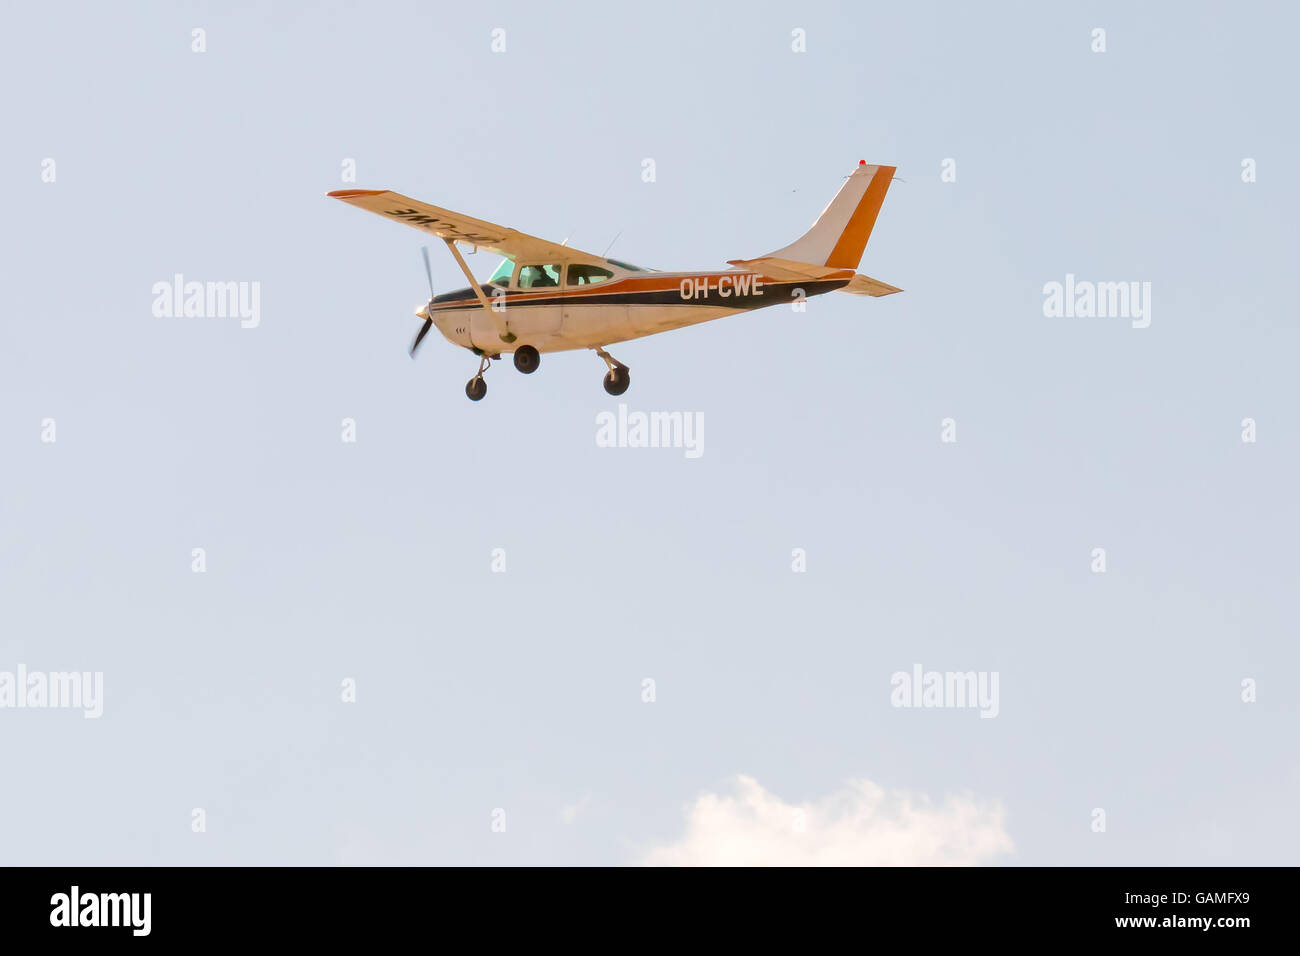 Athens, Greece 13 September 2015. Aviator airplane in the sky at the Athens air week flying show. Stock Photo